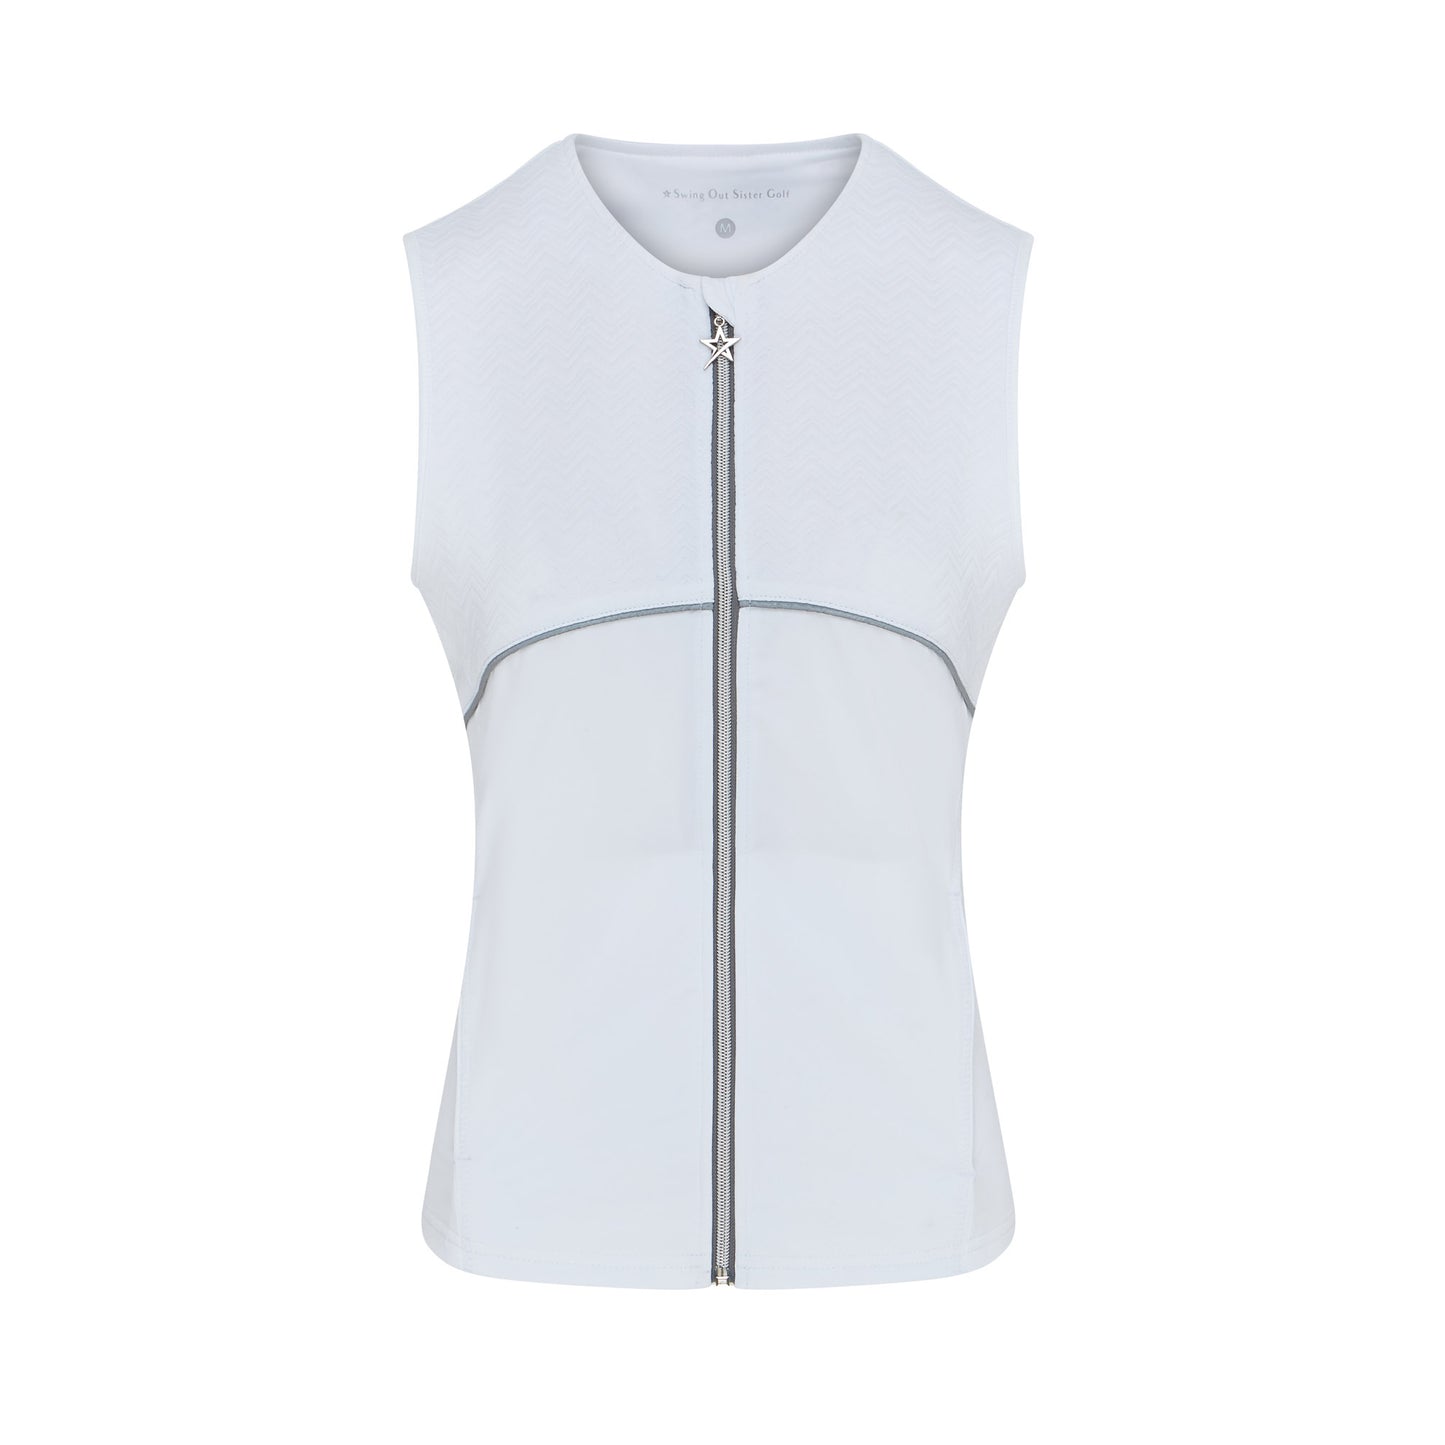 Swing Out Sister Women's Collarless Soft-Stretch Gilet in White